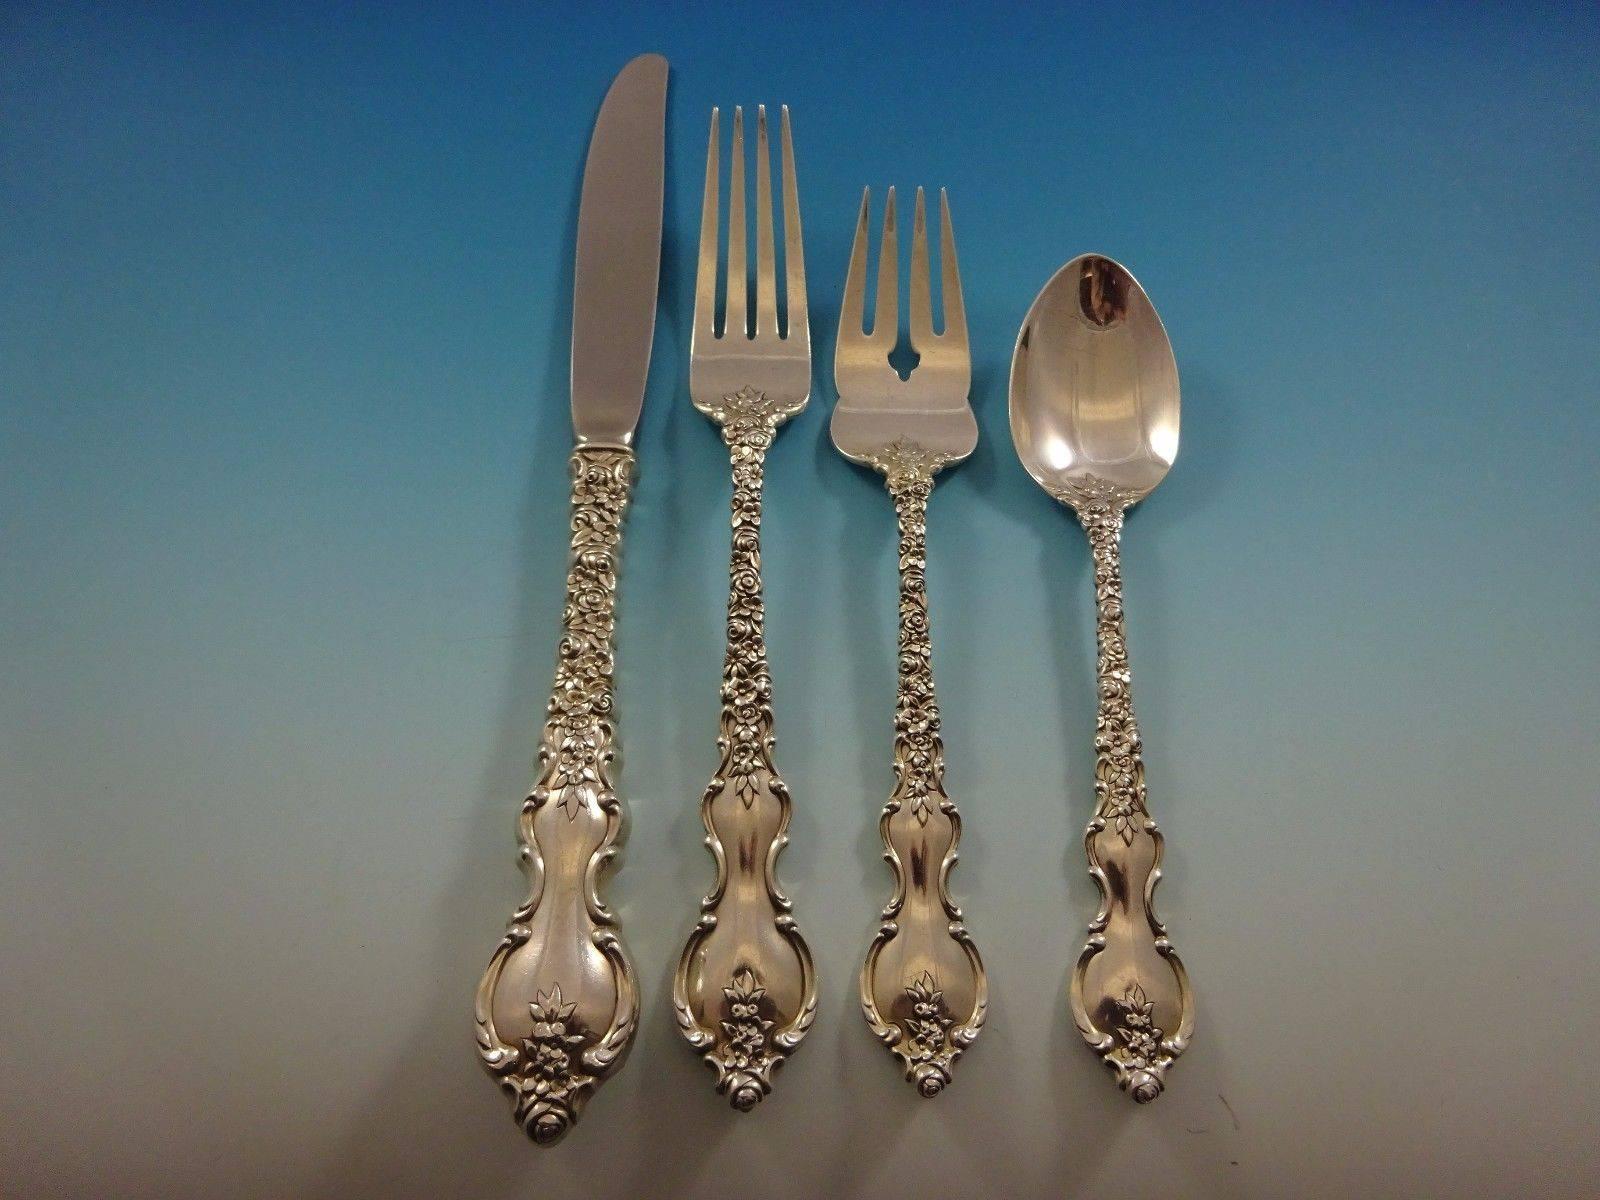 Du Barry by International silver sterling silver flatware set, 79 pieces. This set includes: 

12 knives, 9